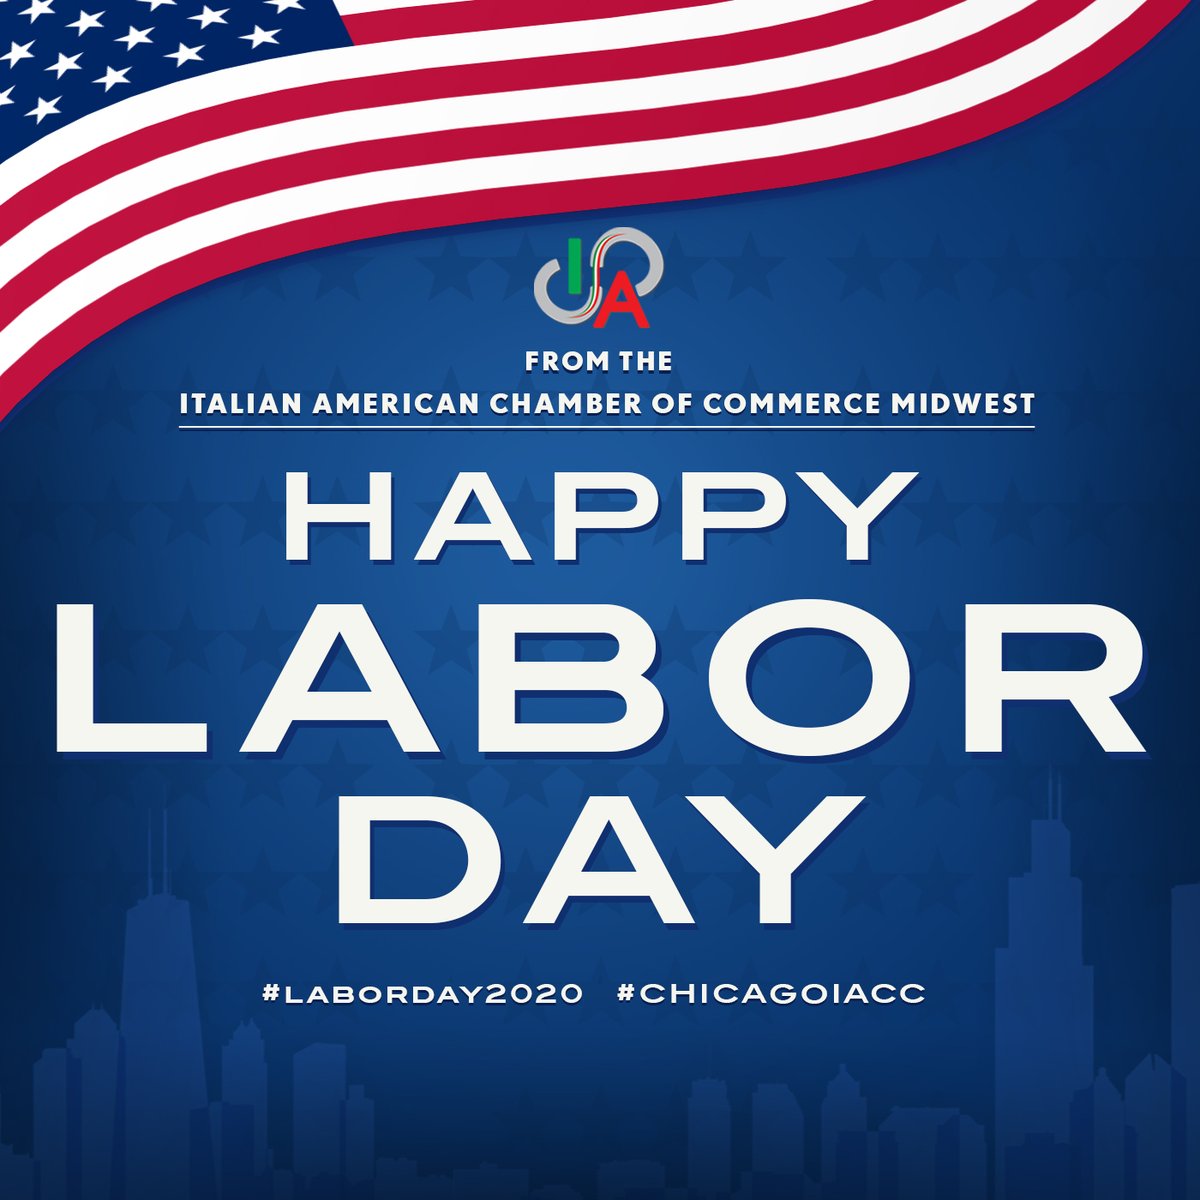 Today, we celebrate the creation of the labor movement in the United States and honor the social and economic achievement of the workers in the country. 🇺🇸 Have a Safe & Happy #LaborDay! #ChicagoIACC